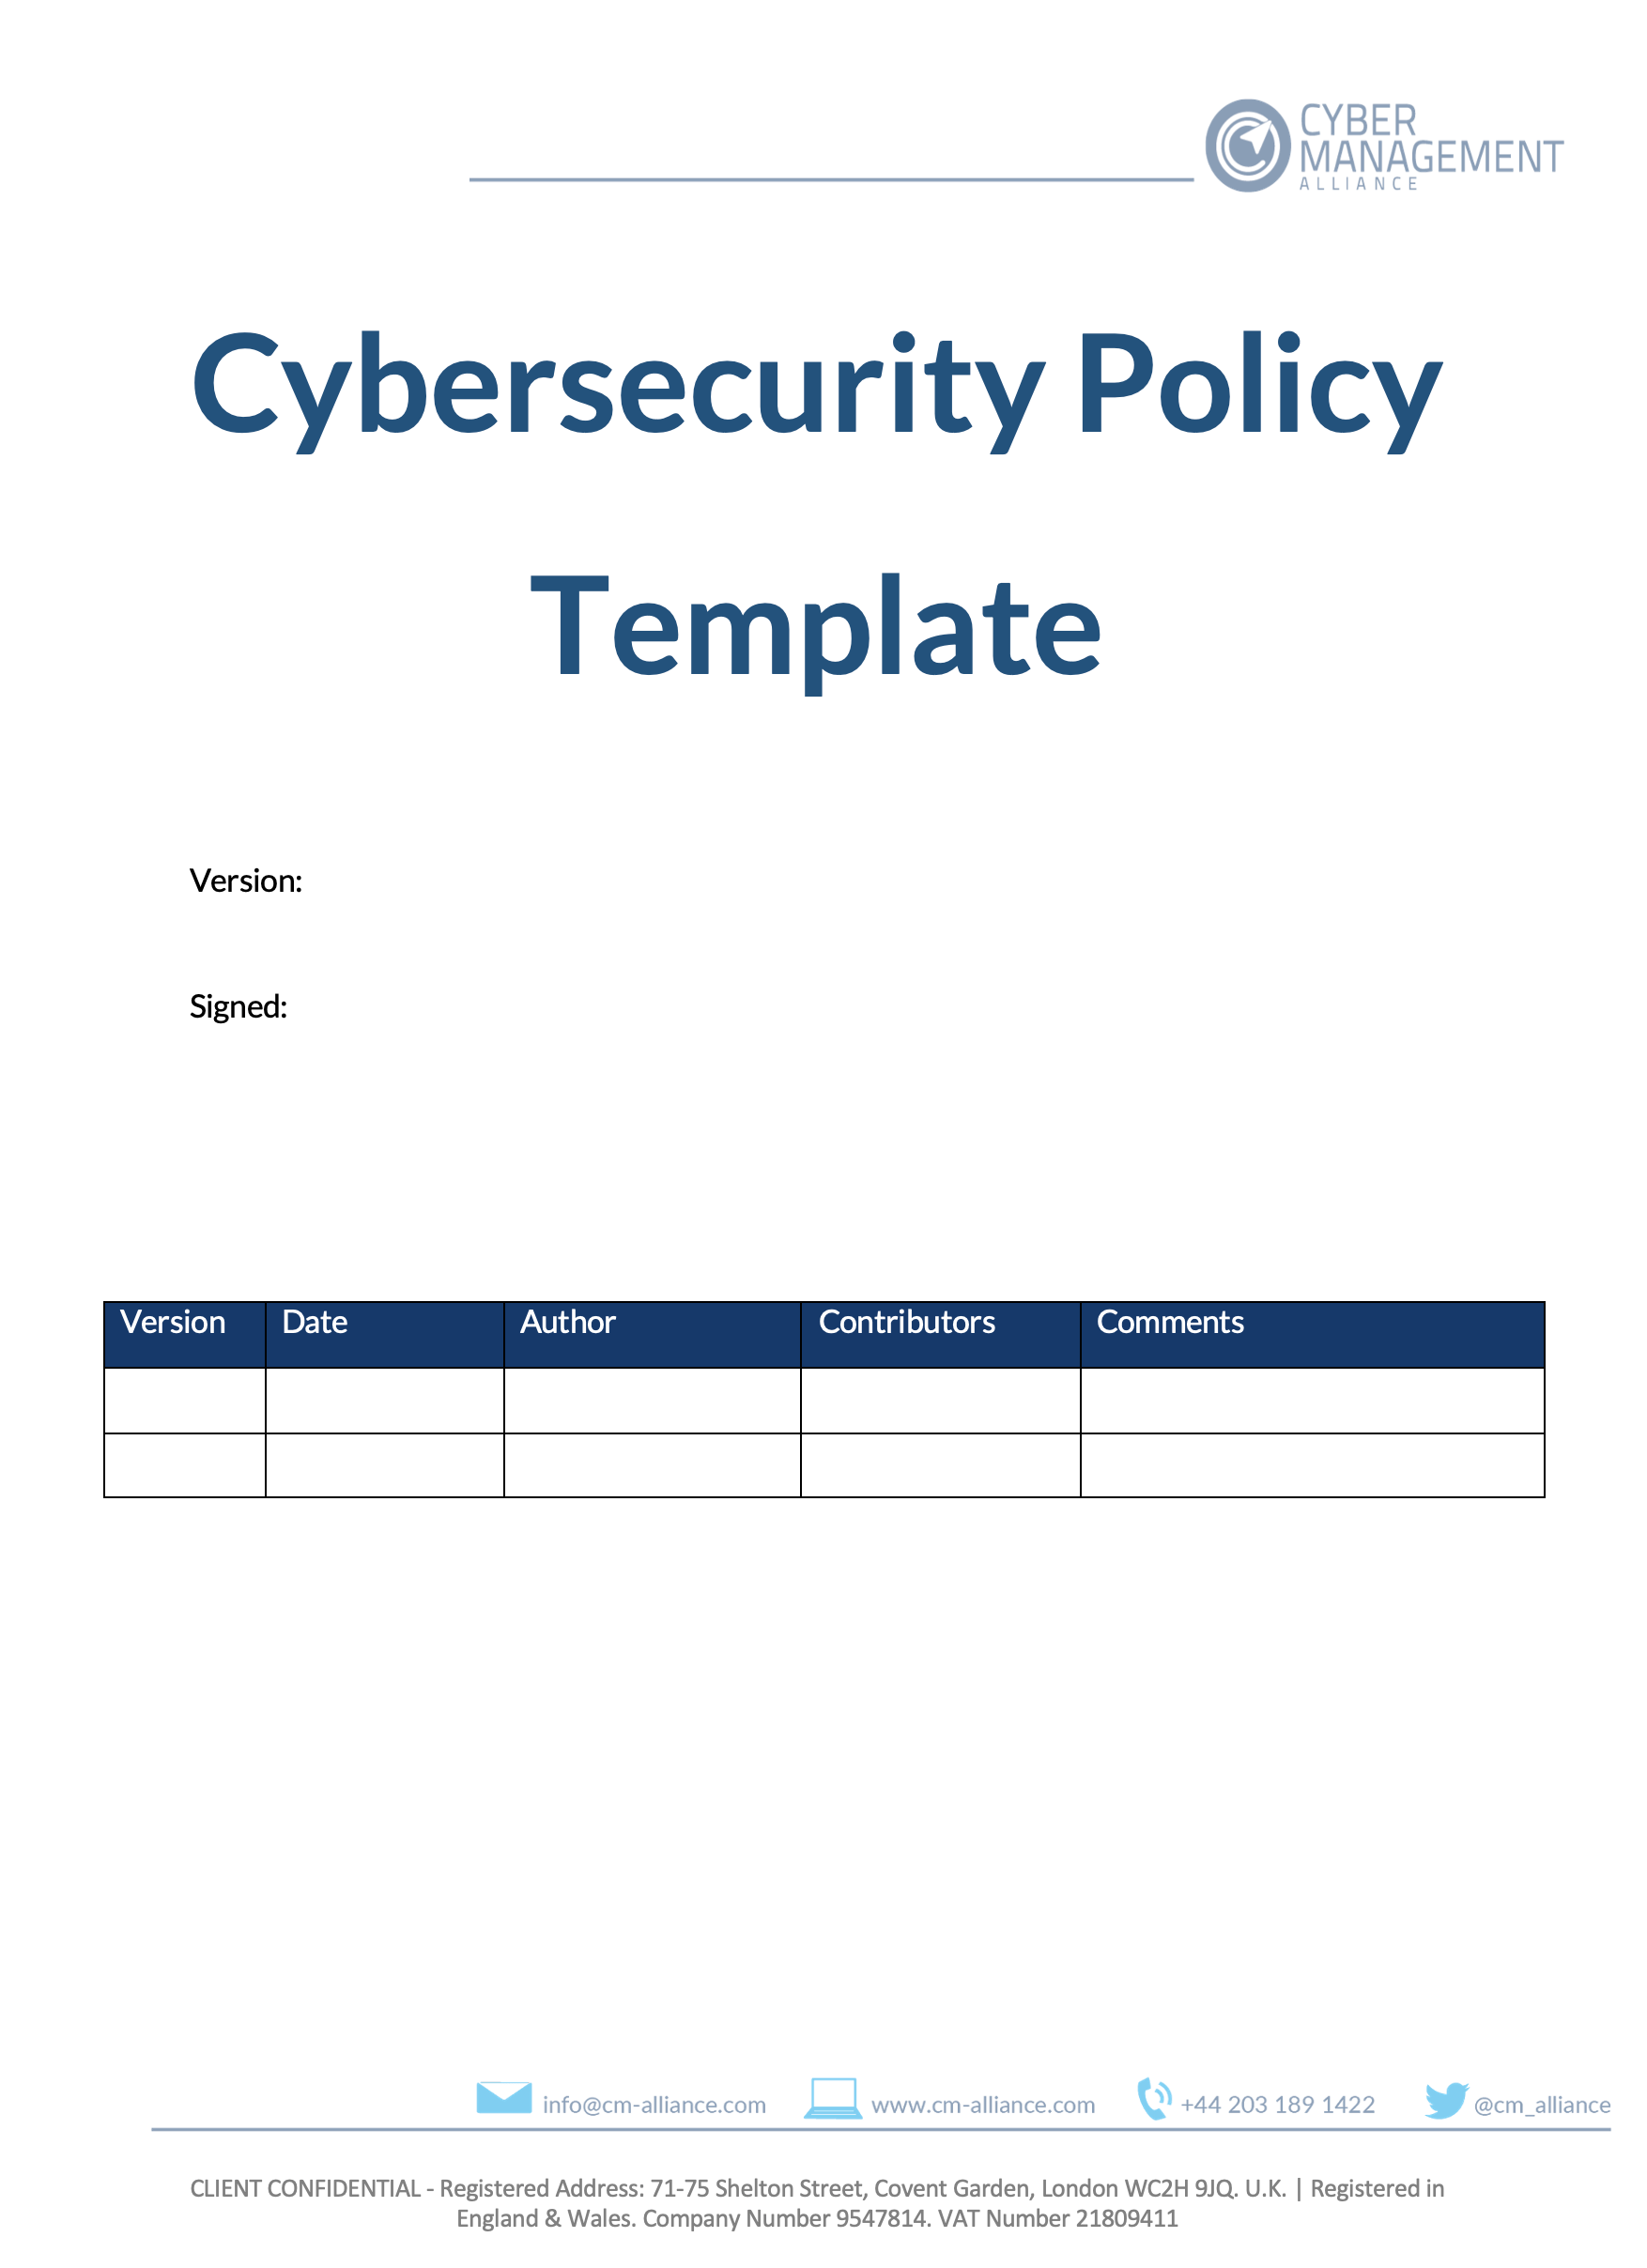 Cybersecurity Policy Template Cover